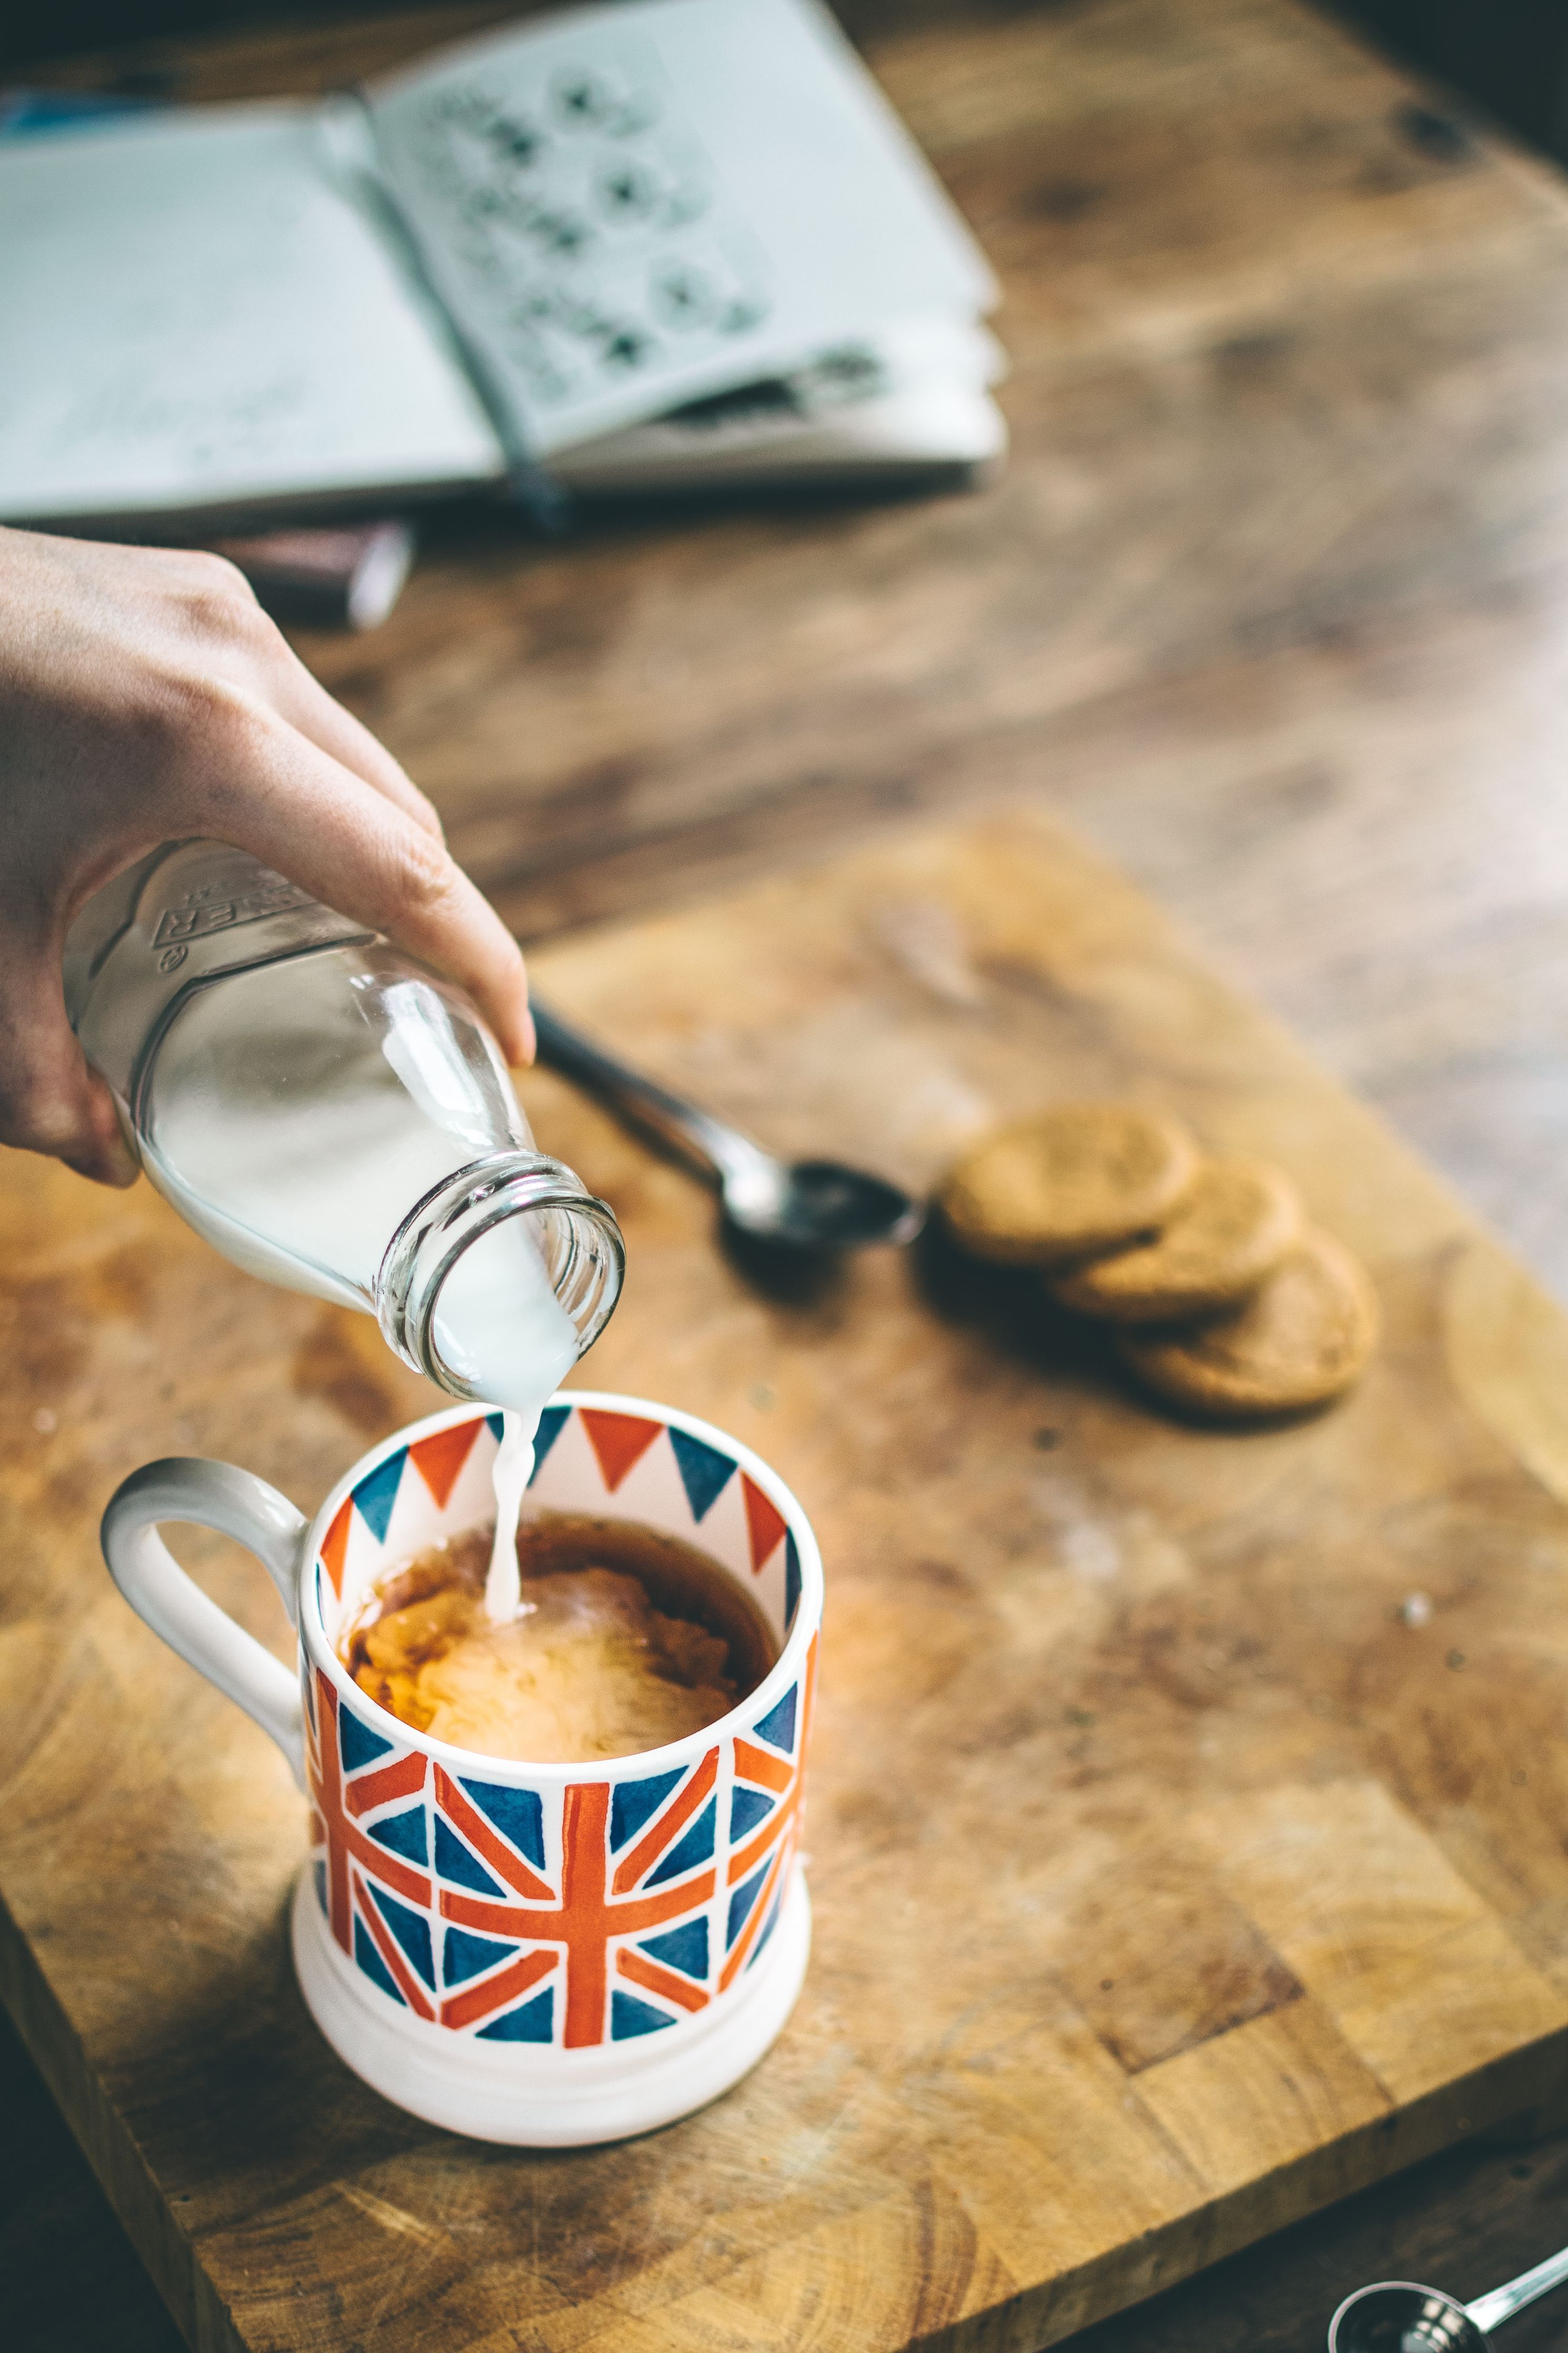 Milk being poured into a teacup with a design of the British flag on the cup